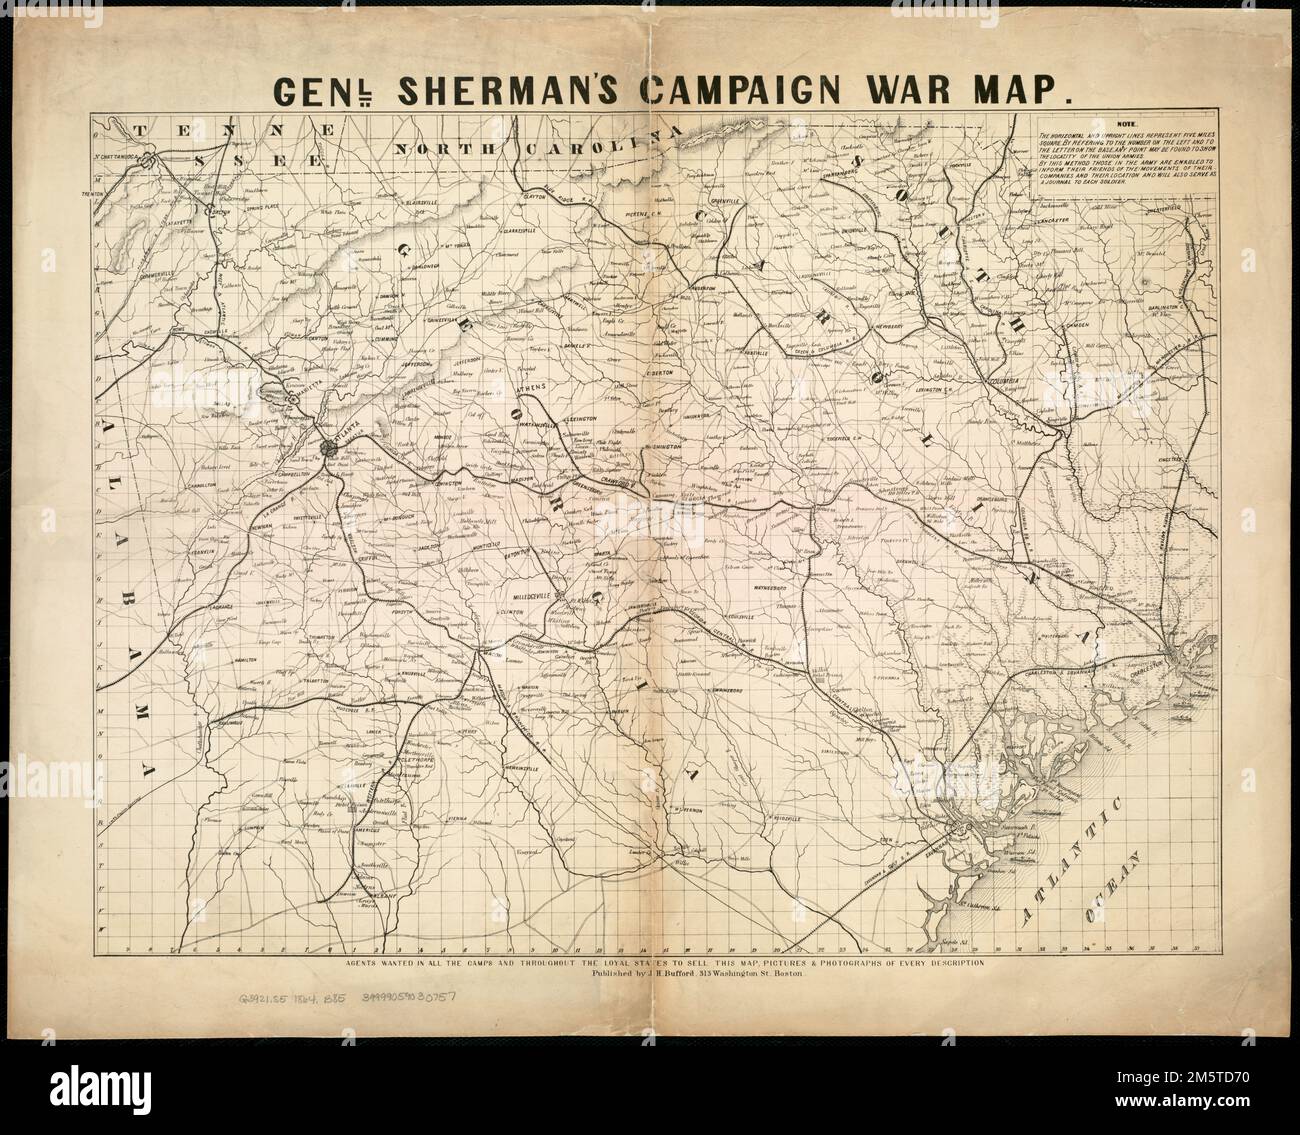 Genl. Sherman's campaign war map. The horizontal and upright lines [of the map grid] represent five miles square. By referring [sic] to the number on the left and to the letter on the base, any point may be found to show the locality of the Union armies. Description derived from published bibliography.. Map covering most of Georgia and South Carolina, showing defenses along the sea coast and around the principal towns, Confederate prisons at Andersonville and south of Millen, Ga., roads, railroads, towns, drainage, and relief by hachures... , Georgia South Carolina Stock Photo